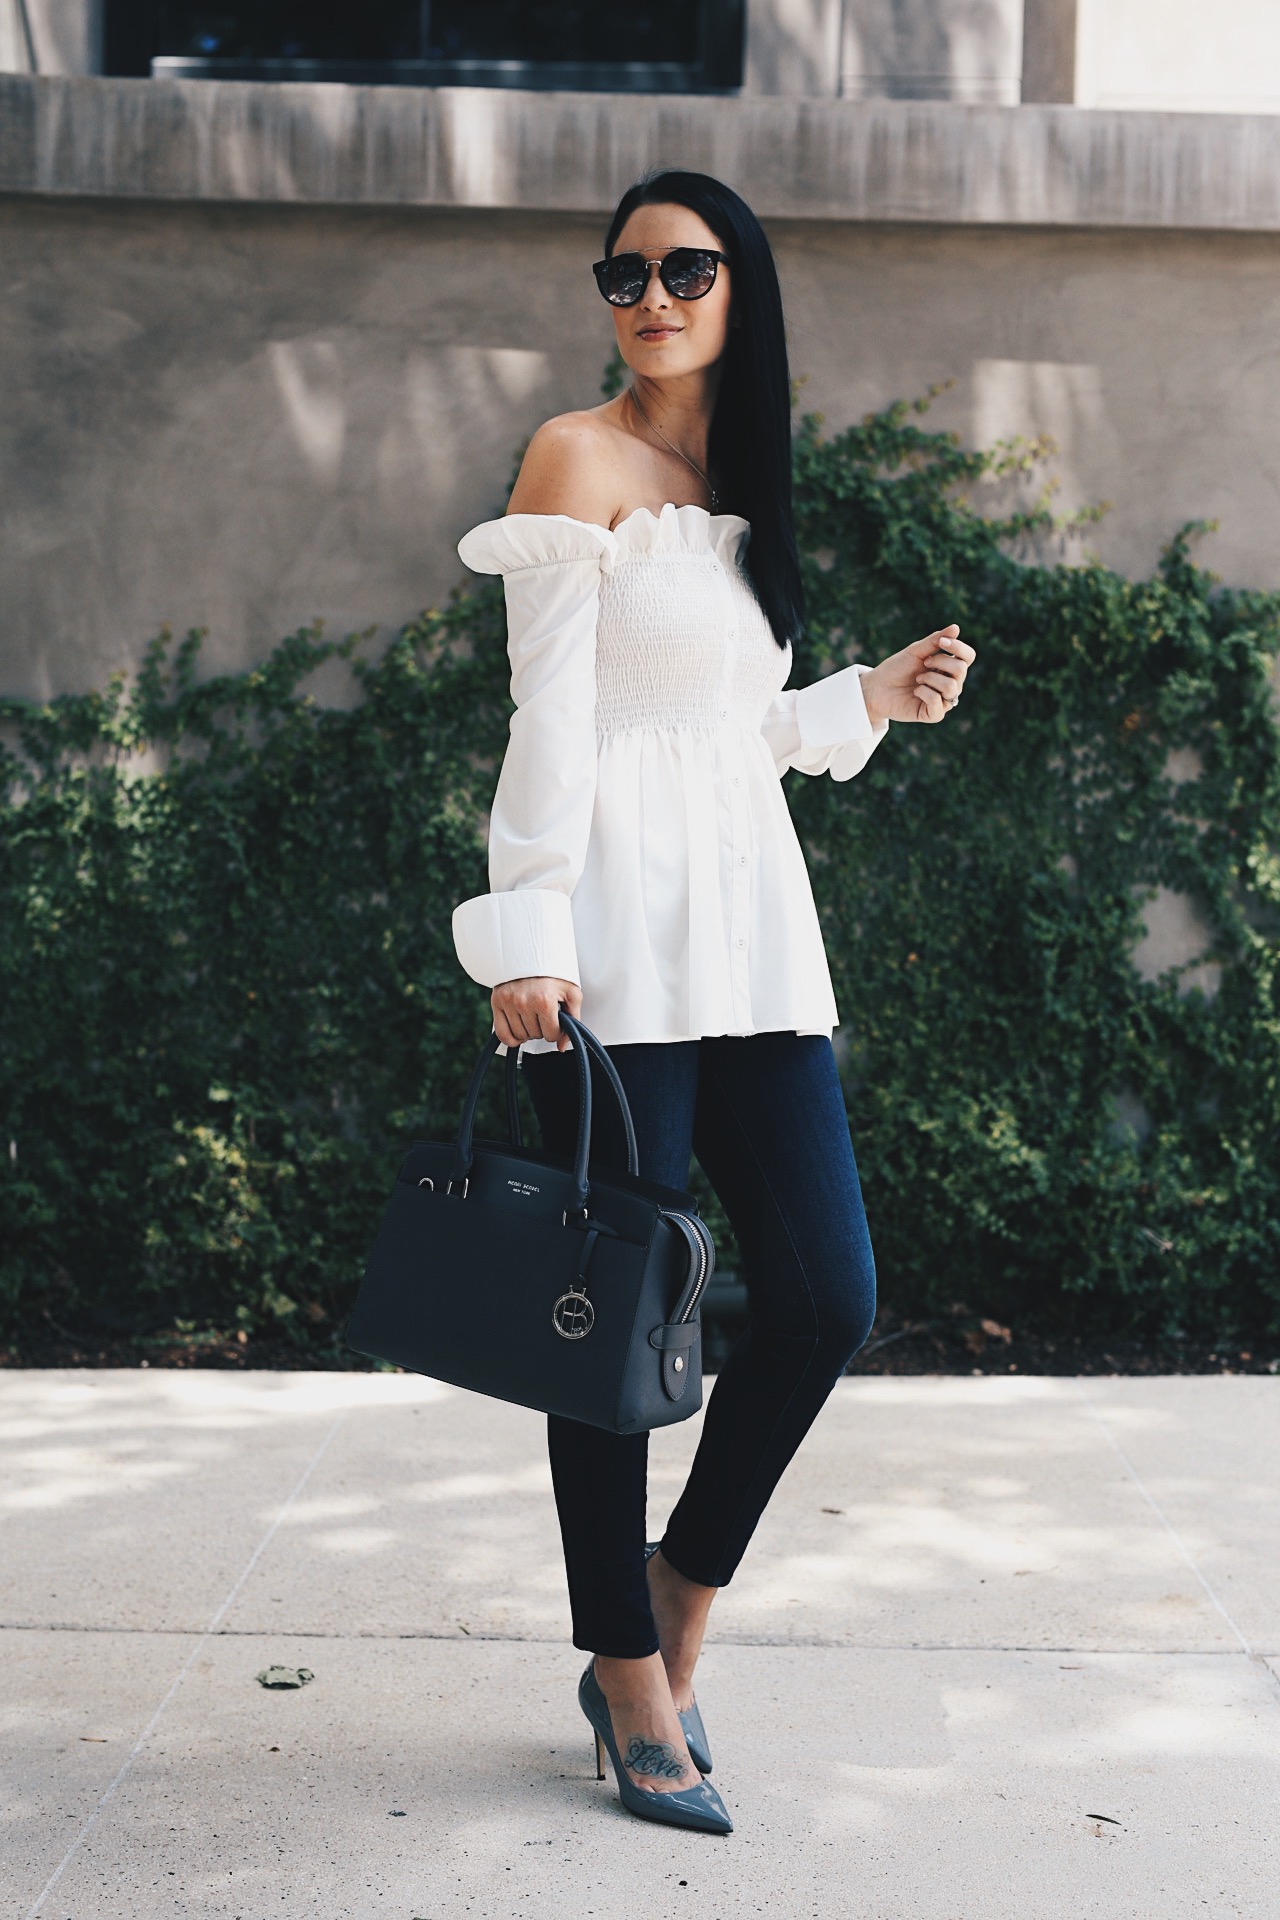 Austin Blogger DTKAustin shares why you should all be wearing white after labor day with Chicwish.